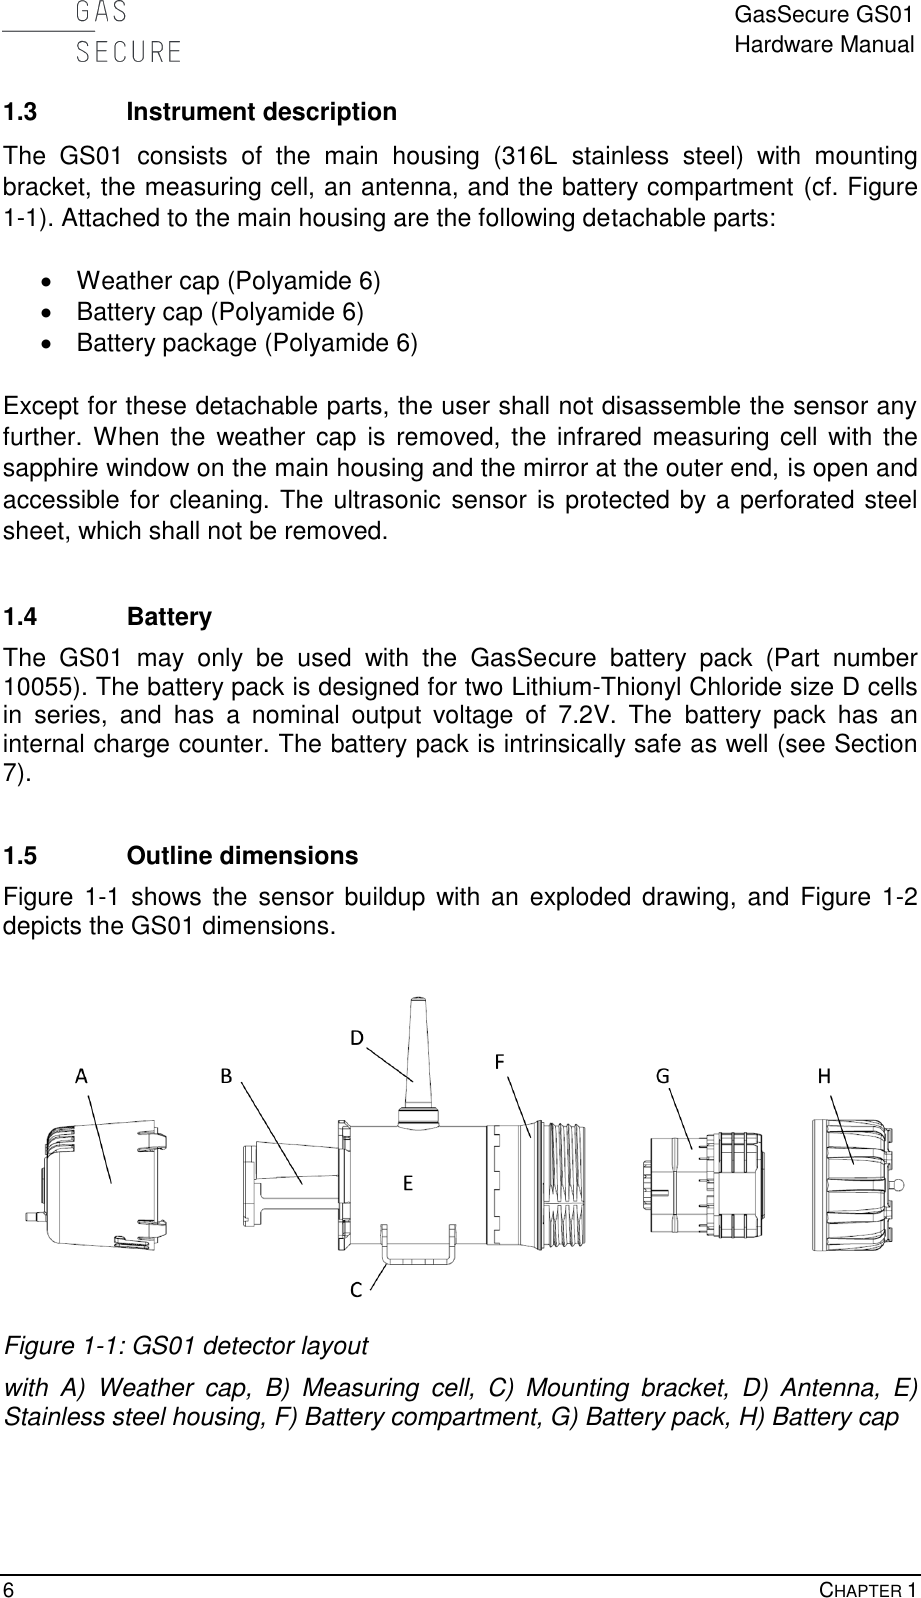  GasSecure GS01 Hardware Manual  6    CHAPTER 1  1.3 Instrument description The  GS01  consists  of  the  main  housing  (316L  stainless  steel)  with  mounting bracket, the measuring cell, an antenna, and the battery compartment (cf. Figure 1-1). Attached to the main housing are the following detachable parts:    Weather cap (Polyamide 6)   Battery cap (Polyamide 6)   Battery package (Polyamide 6)  Except for these detachable parts, the user shall not disassemble the sensor any further.  When the weather cap is removed,  the infrared measuring cell  with the sapphire window on the main housing and the mirror at the outer end, is open and accessible for cleaning. The ultrasonic sensor is protected by a perforated steel sheet, which shall not be removed.  1.4 Battery The  GS01  may  only  be  used  with  the  GasSecure  battery  pack  (Part  number 10055). The battery pack is designed for two Lithium-Thionyl Chloride size D cells in  series,  and  has  a  nominal  output  voltage  of  7.2V.  The  battery  pack  has  an internal charge counter. The battery pack is intrinsically safe as well (see Section 7).  1.5 Outline dimensions Figure 1-1  shows the sensor  buildup with an  exploded drawing,  and Figure  1-2 depicts the GS01 dimensions.   Figure 1-1: GS01 detector layout with  A)  Weather  cap,  B)  Measuring  cell,  C)  Mounting  bracket,  D)  Antenna,  E) Stainless steel housing, F) Battery compartment, G) Battery pack, H) Battery cap  